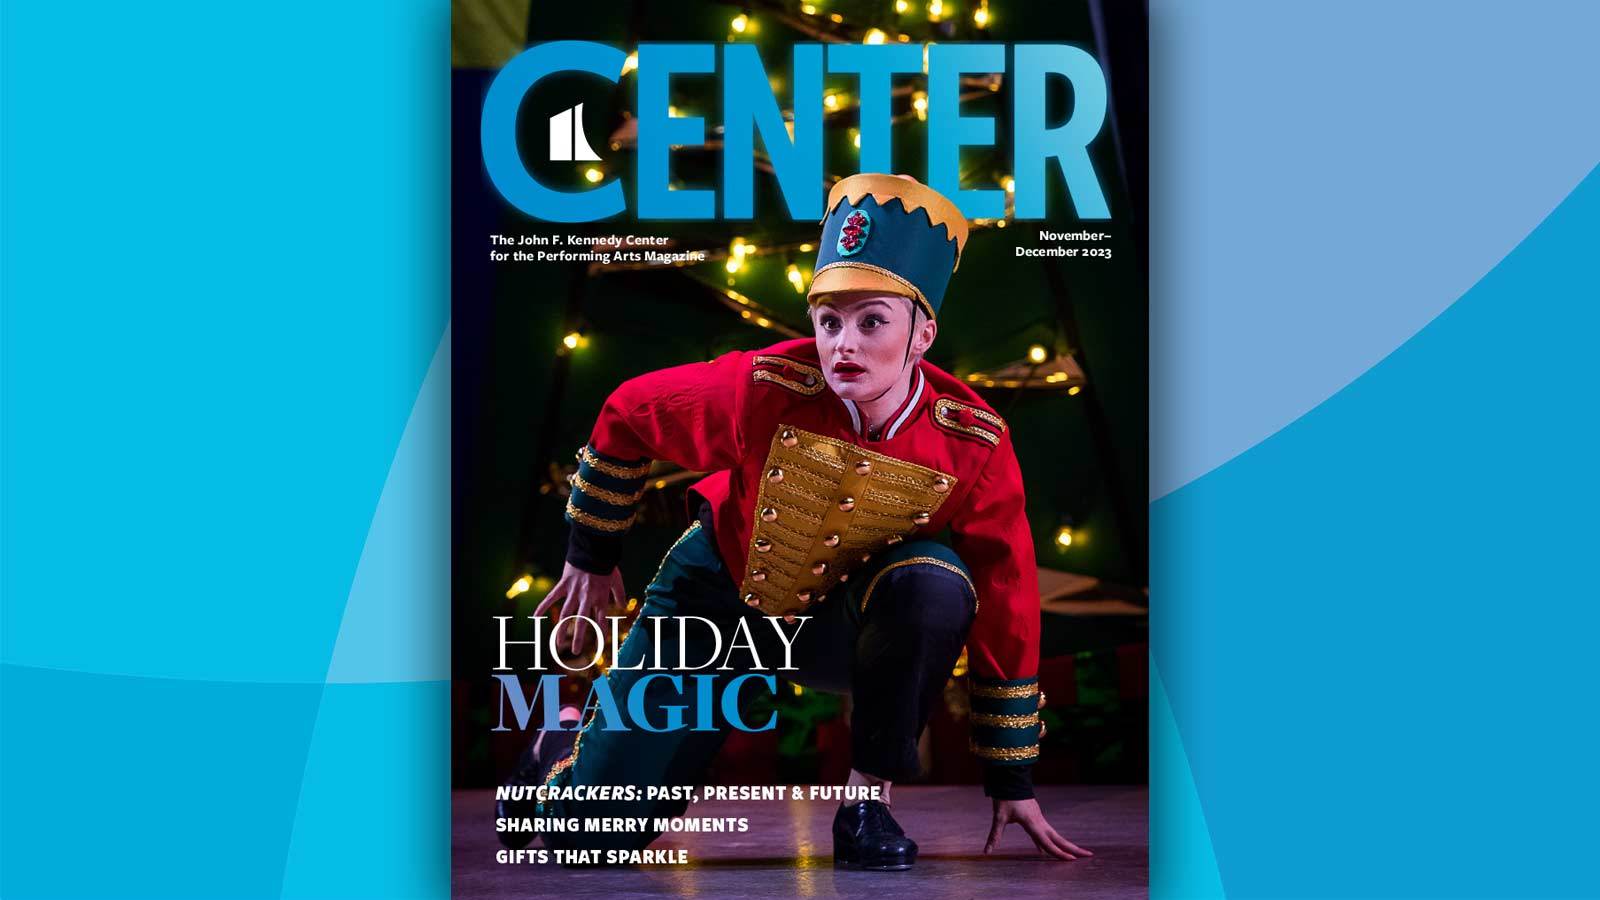 The CENTER magazine cover features a soldier from the Nutcracker doing a dance move.